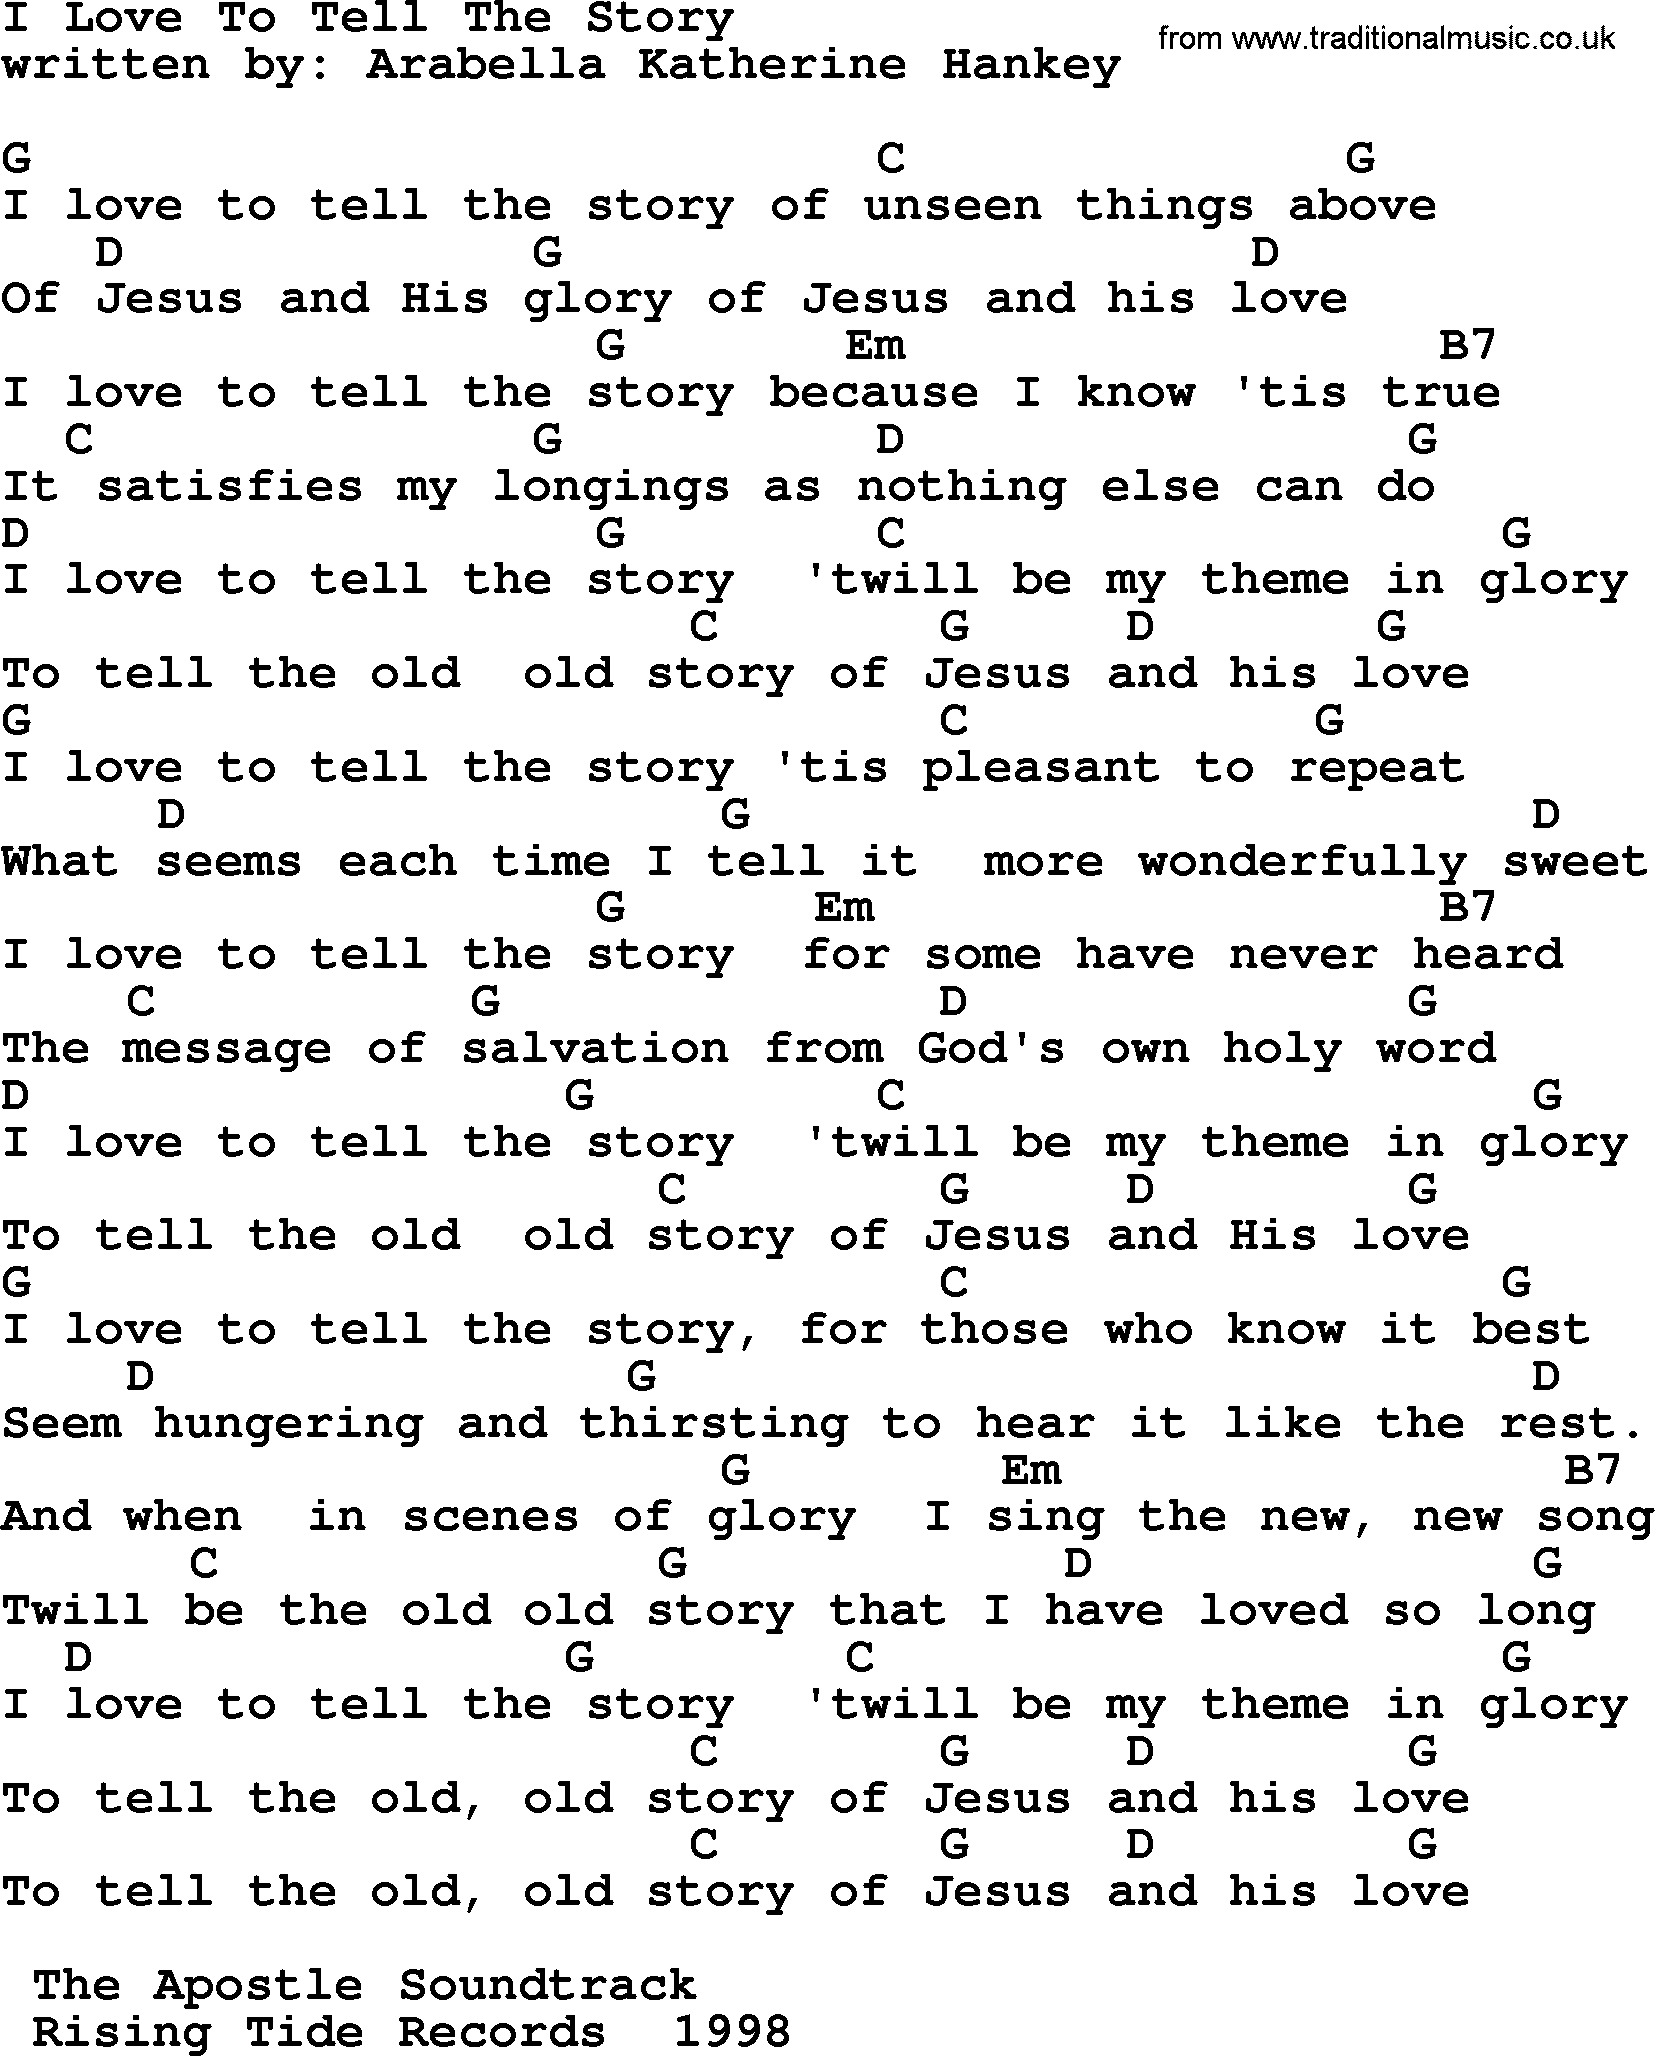 Love Story Chords Emmylou Harris Song I Love To Tell The Story Lyrics And Chords